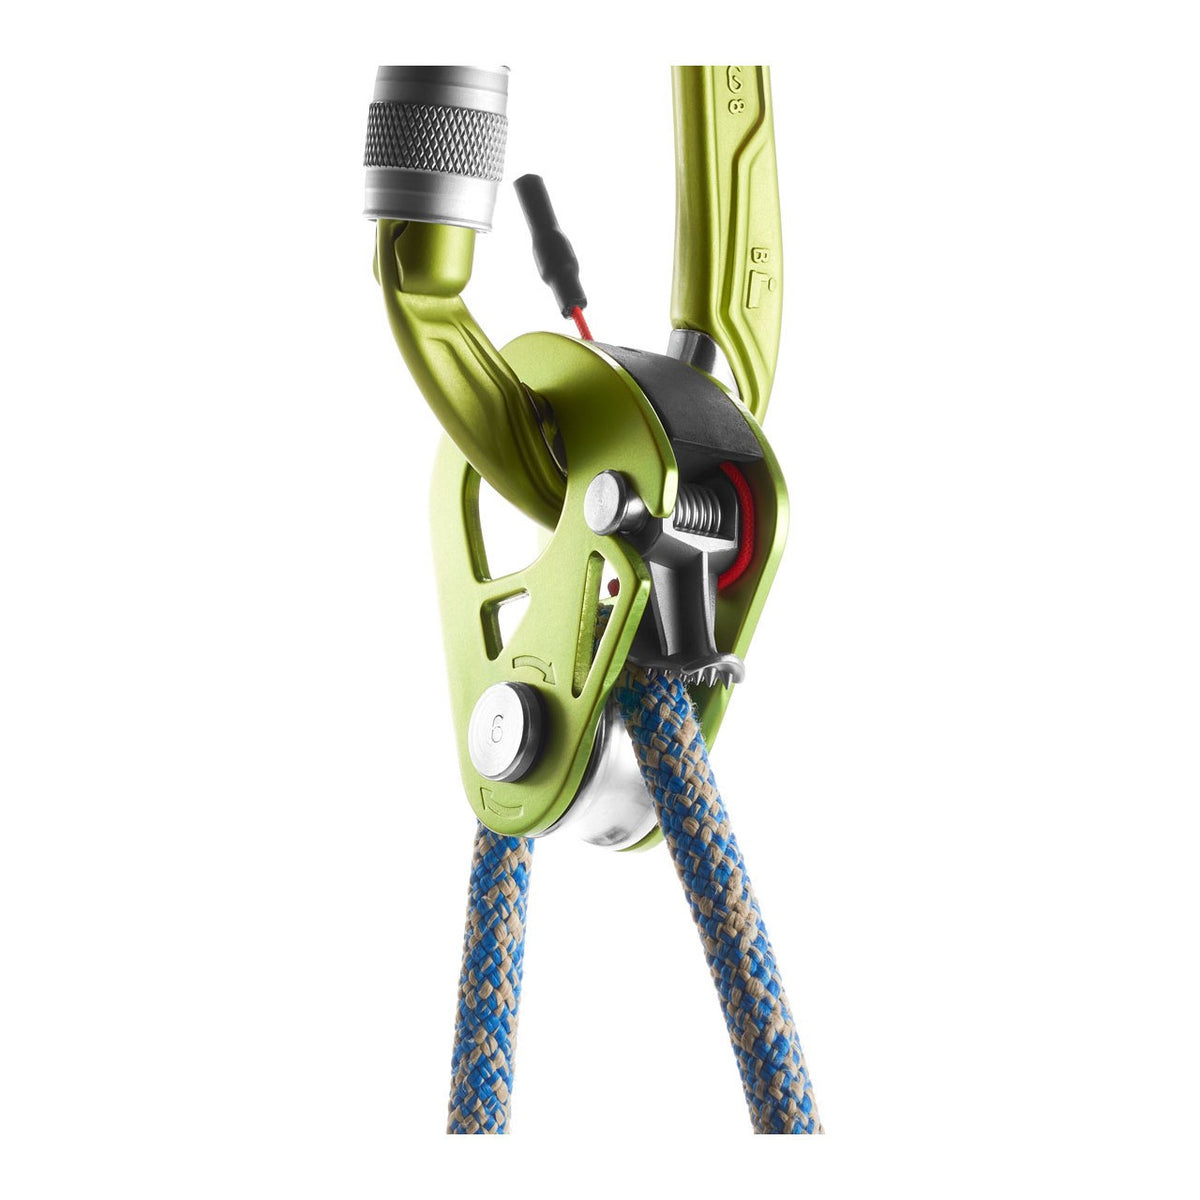 Edelrid Spocshown in use with a blue rope and green carabiner